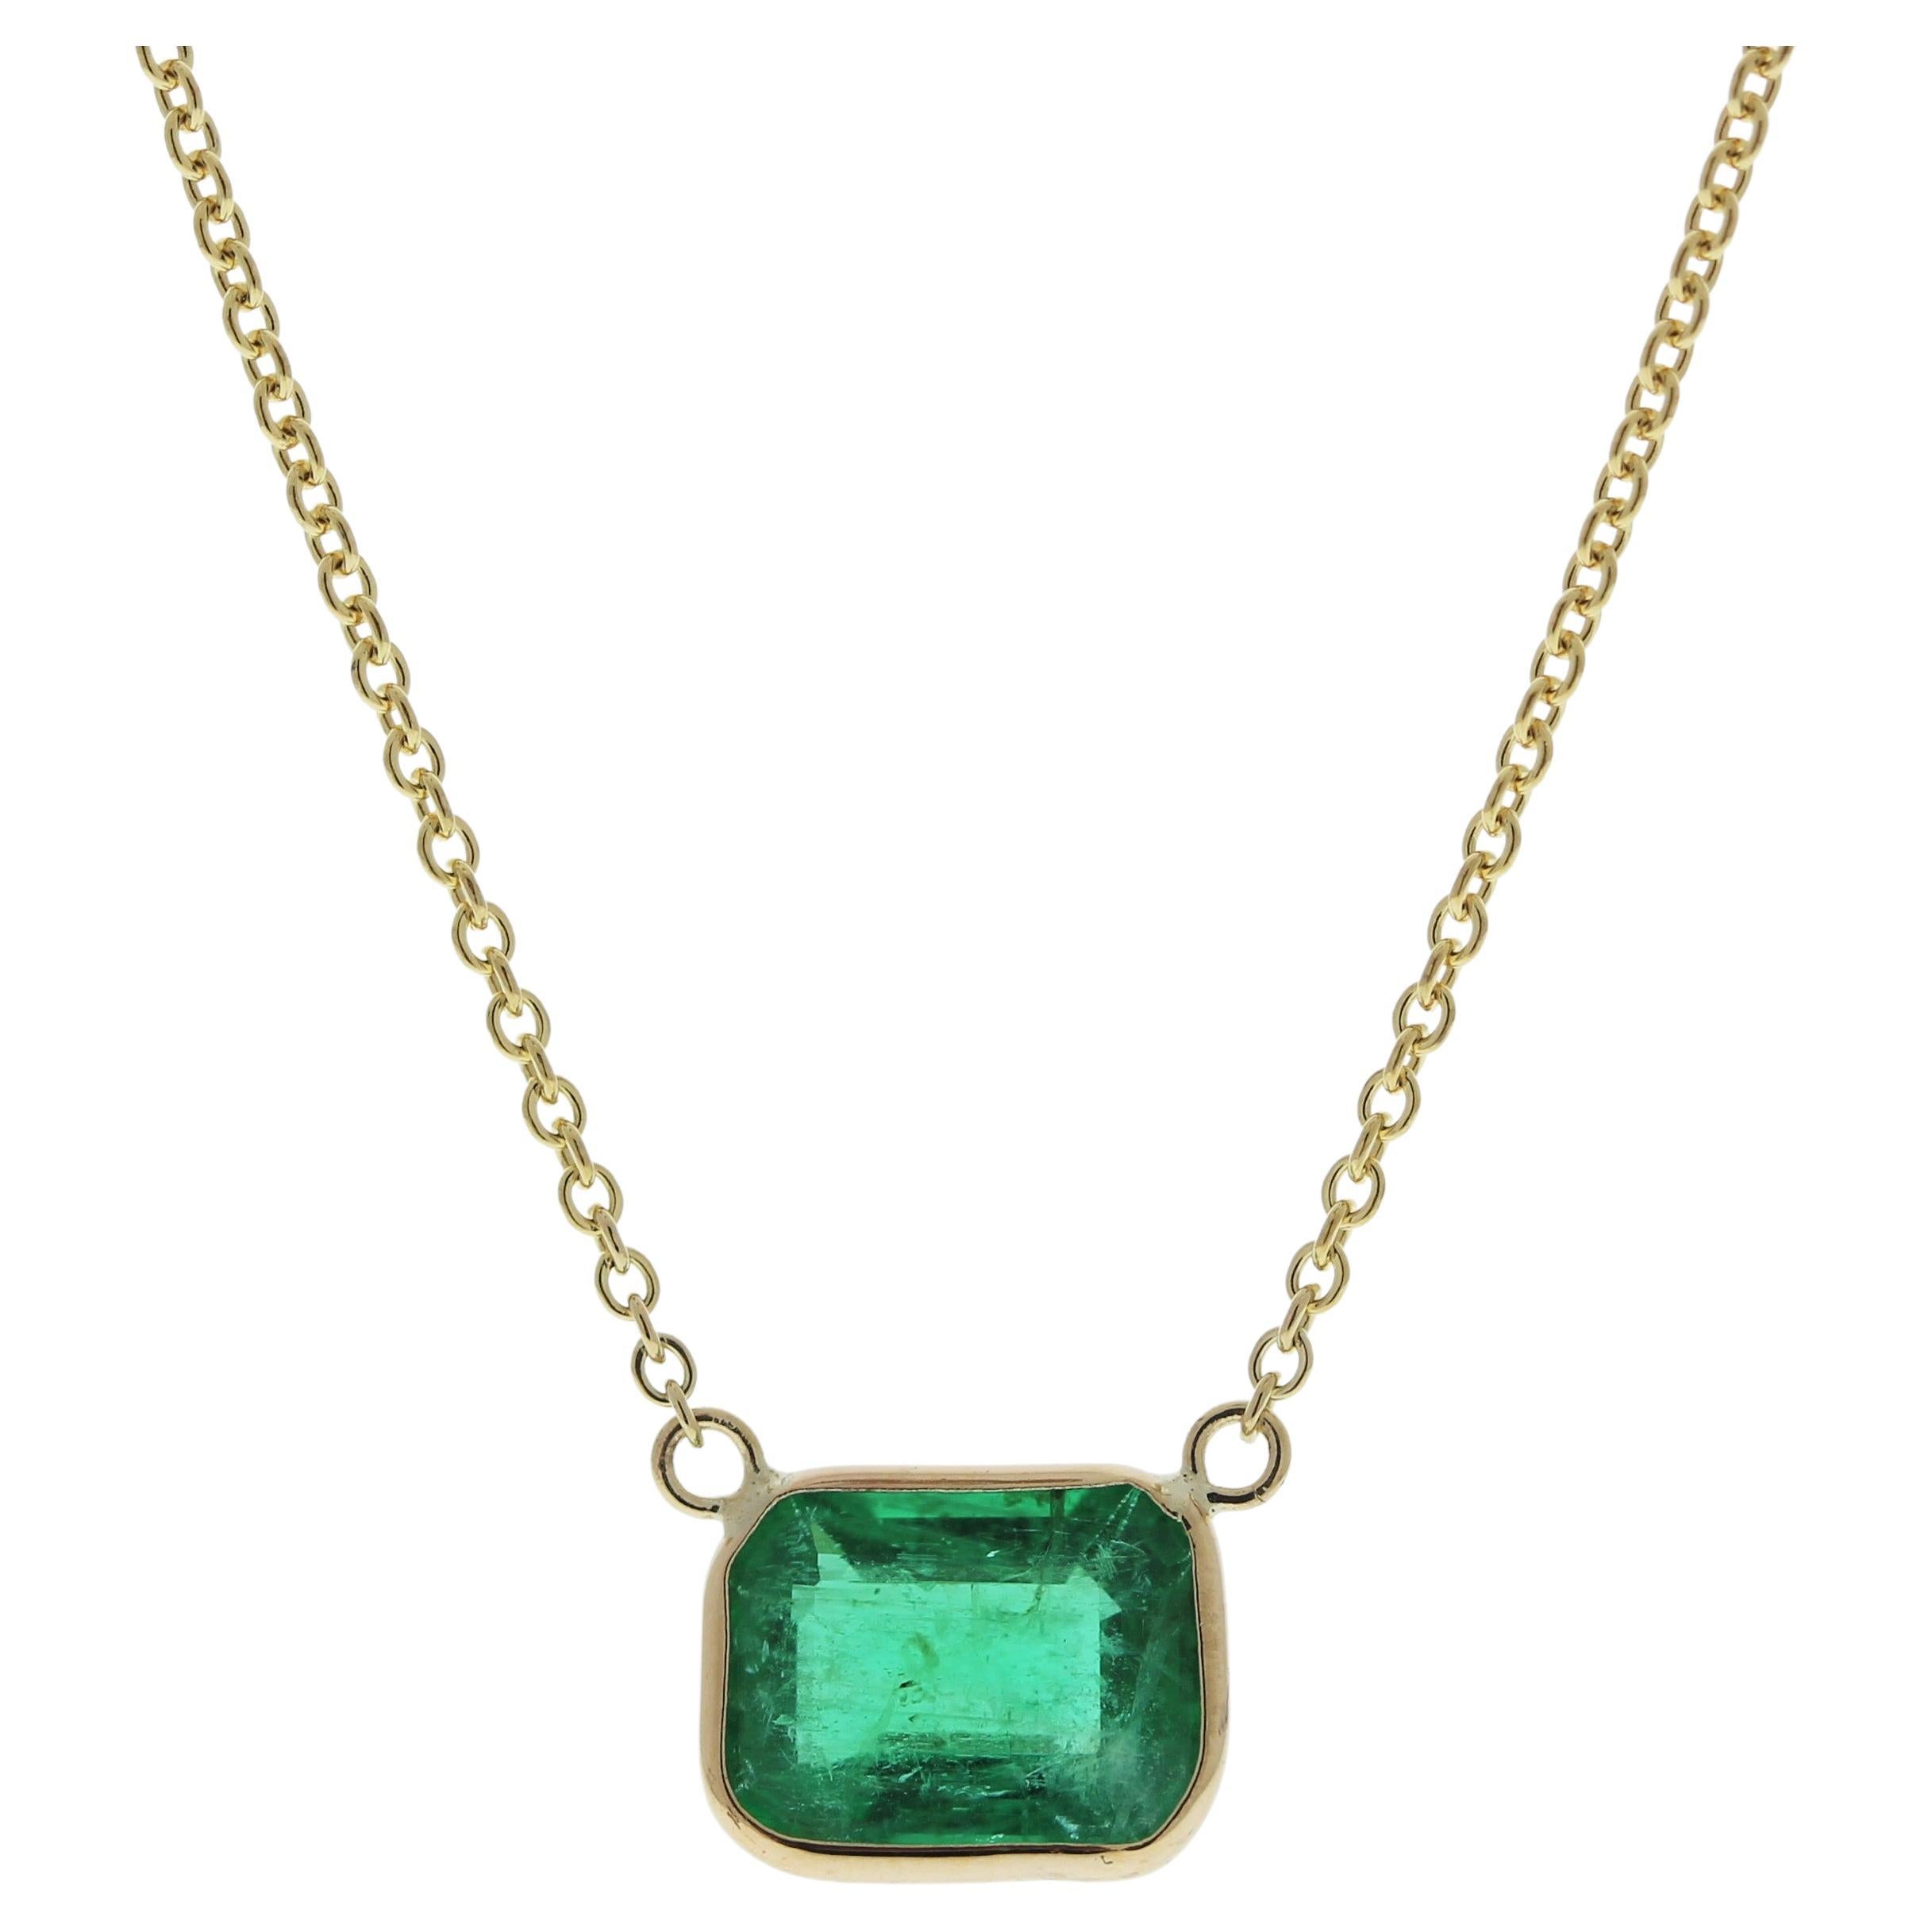 1.80 Carat Emerald Green Fashion Necklaces In 14k Yellow Gold